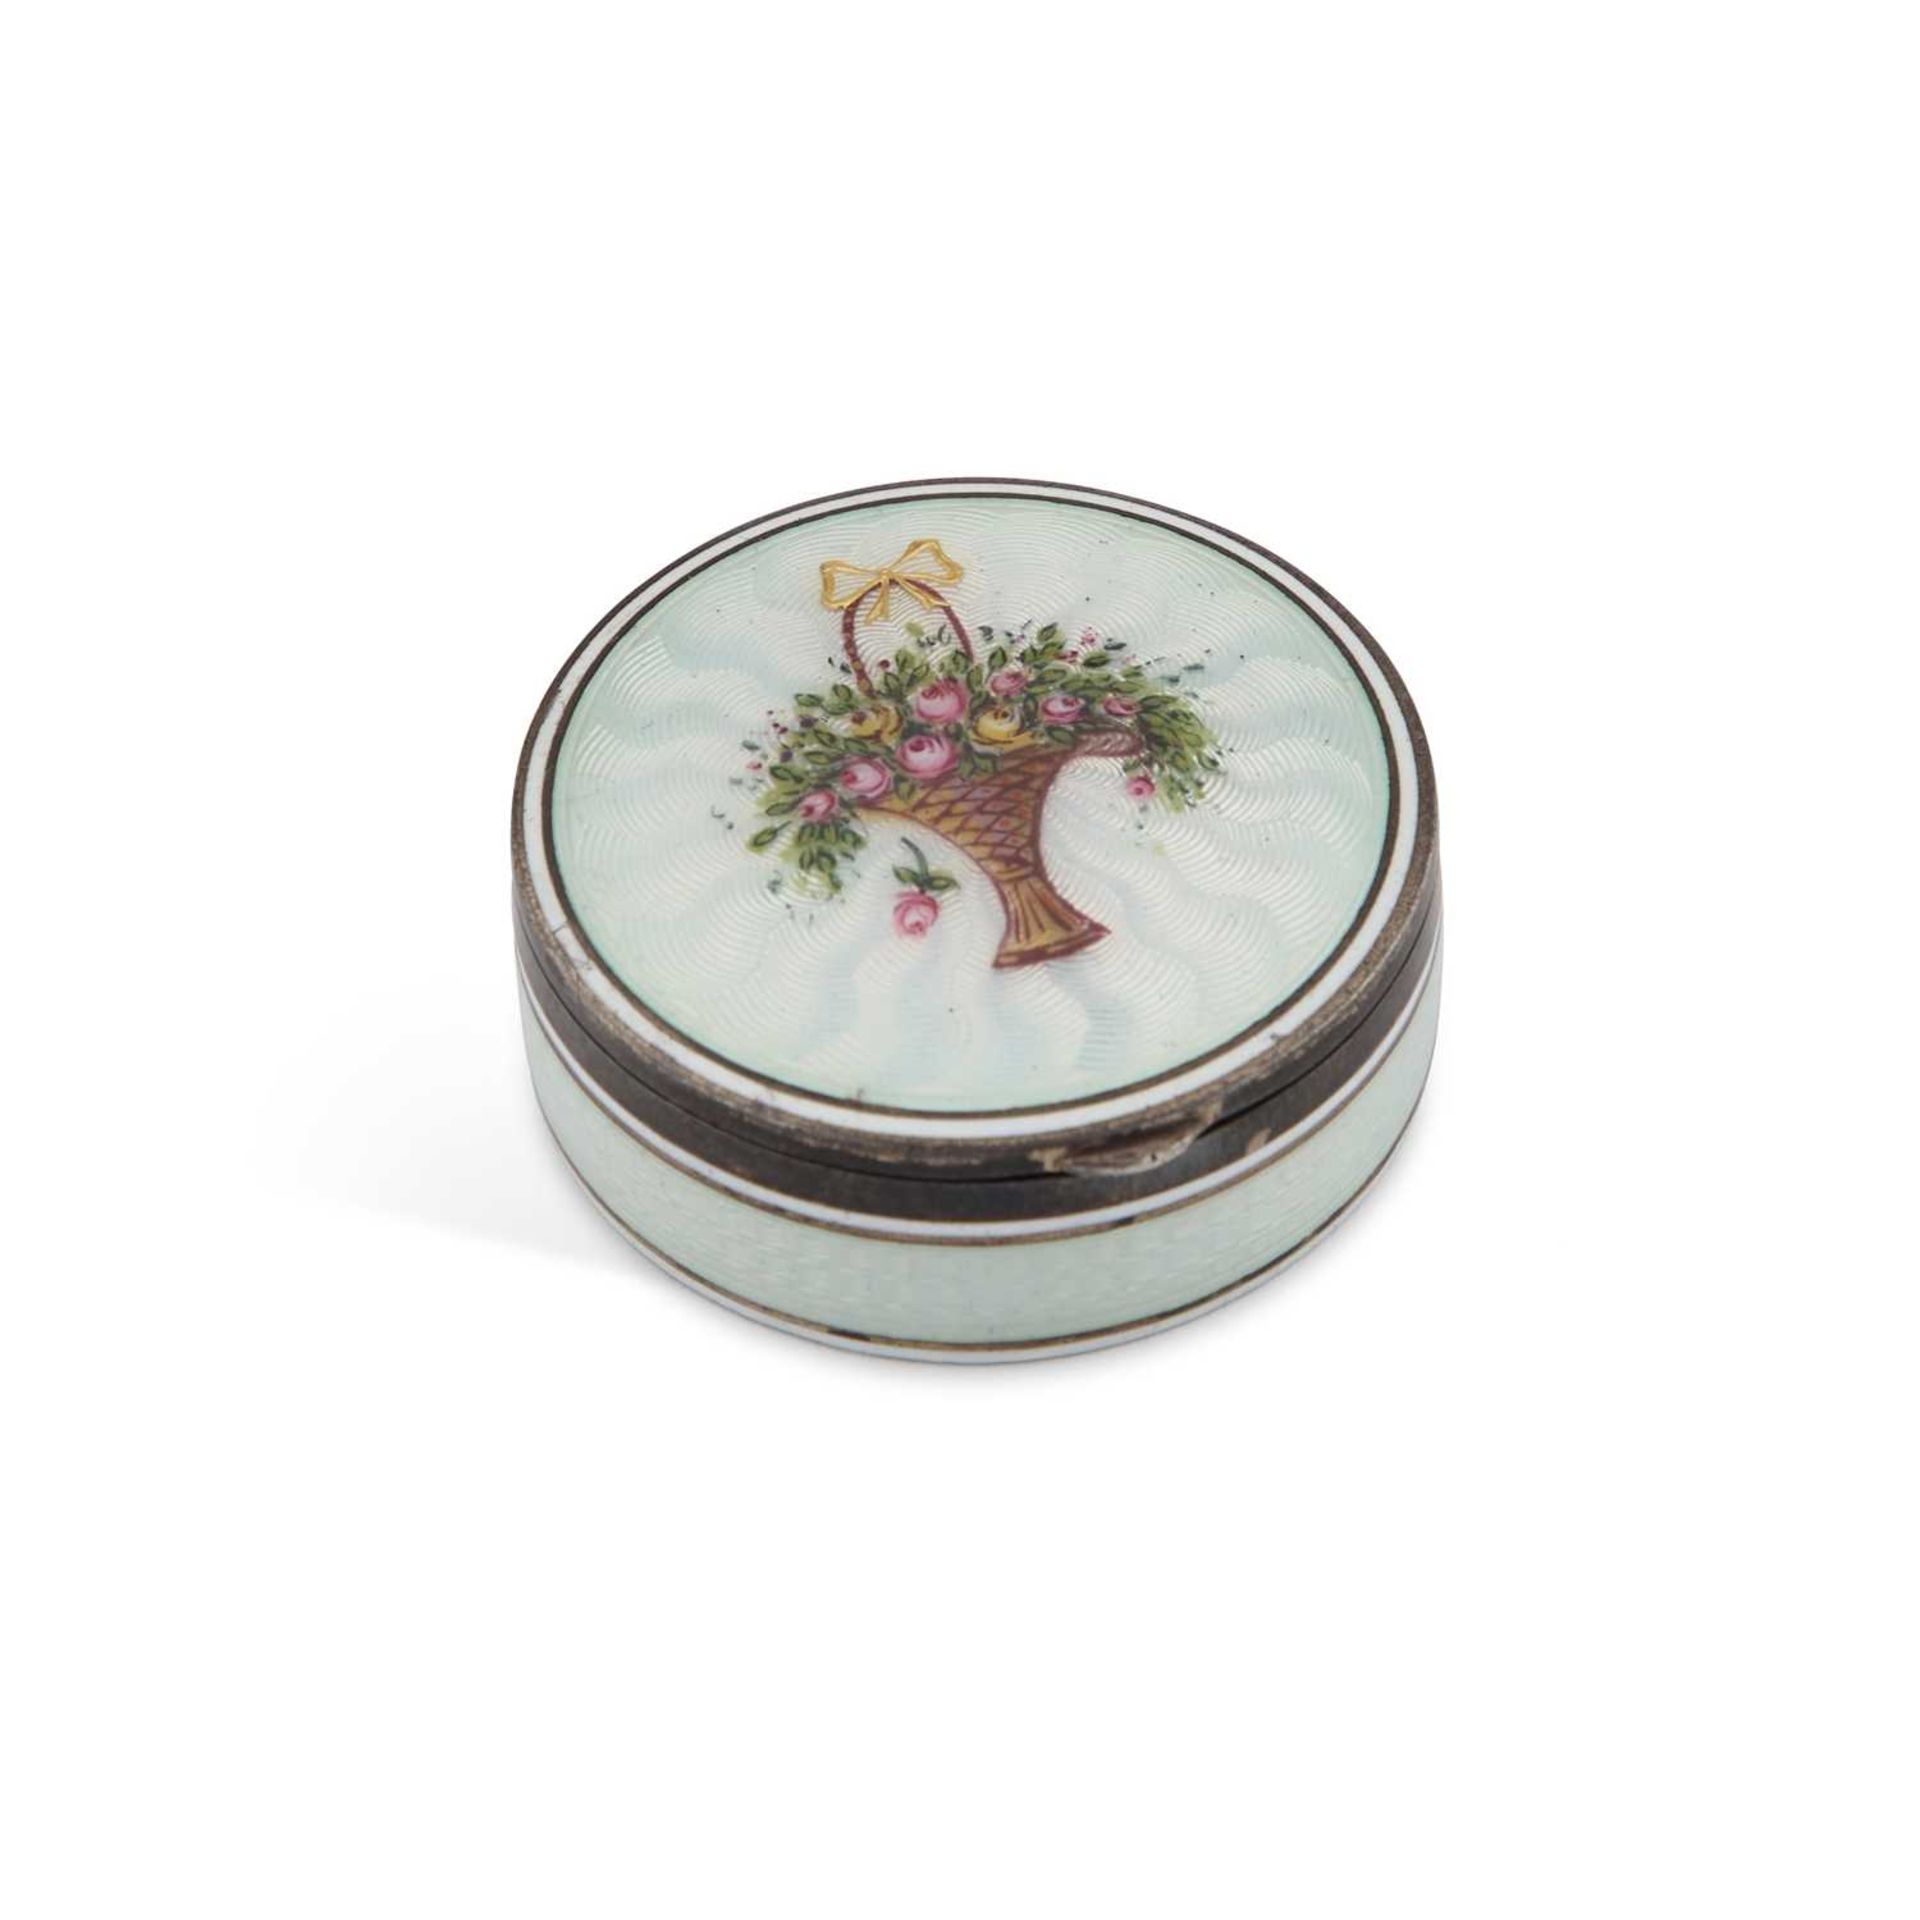 A CONTINENTAL SILVER AND ENAMEL PILL BOX